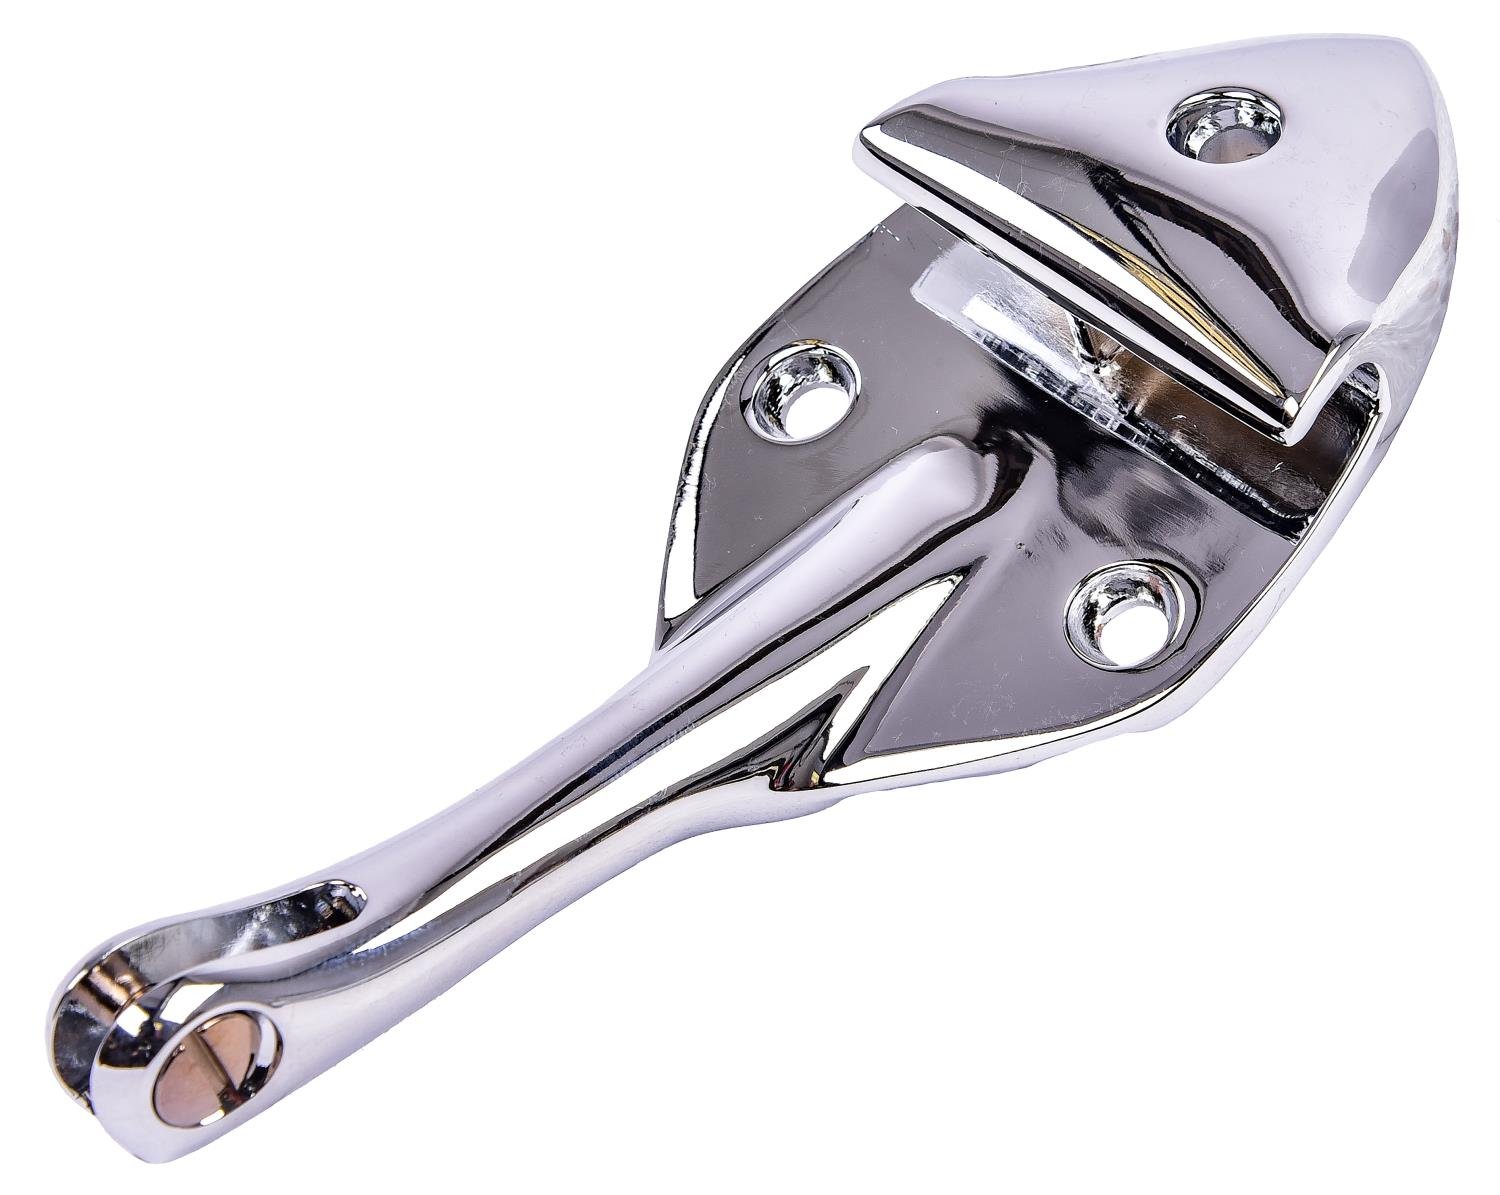 Inside Mirror Support Bracket Fits Select 1966 Buick, Chevy, Olds; 1964-1966 Pontiac (GM A-Body) Coupe/Hardtop Models